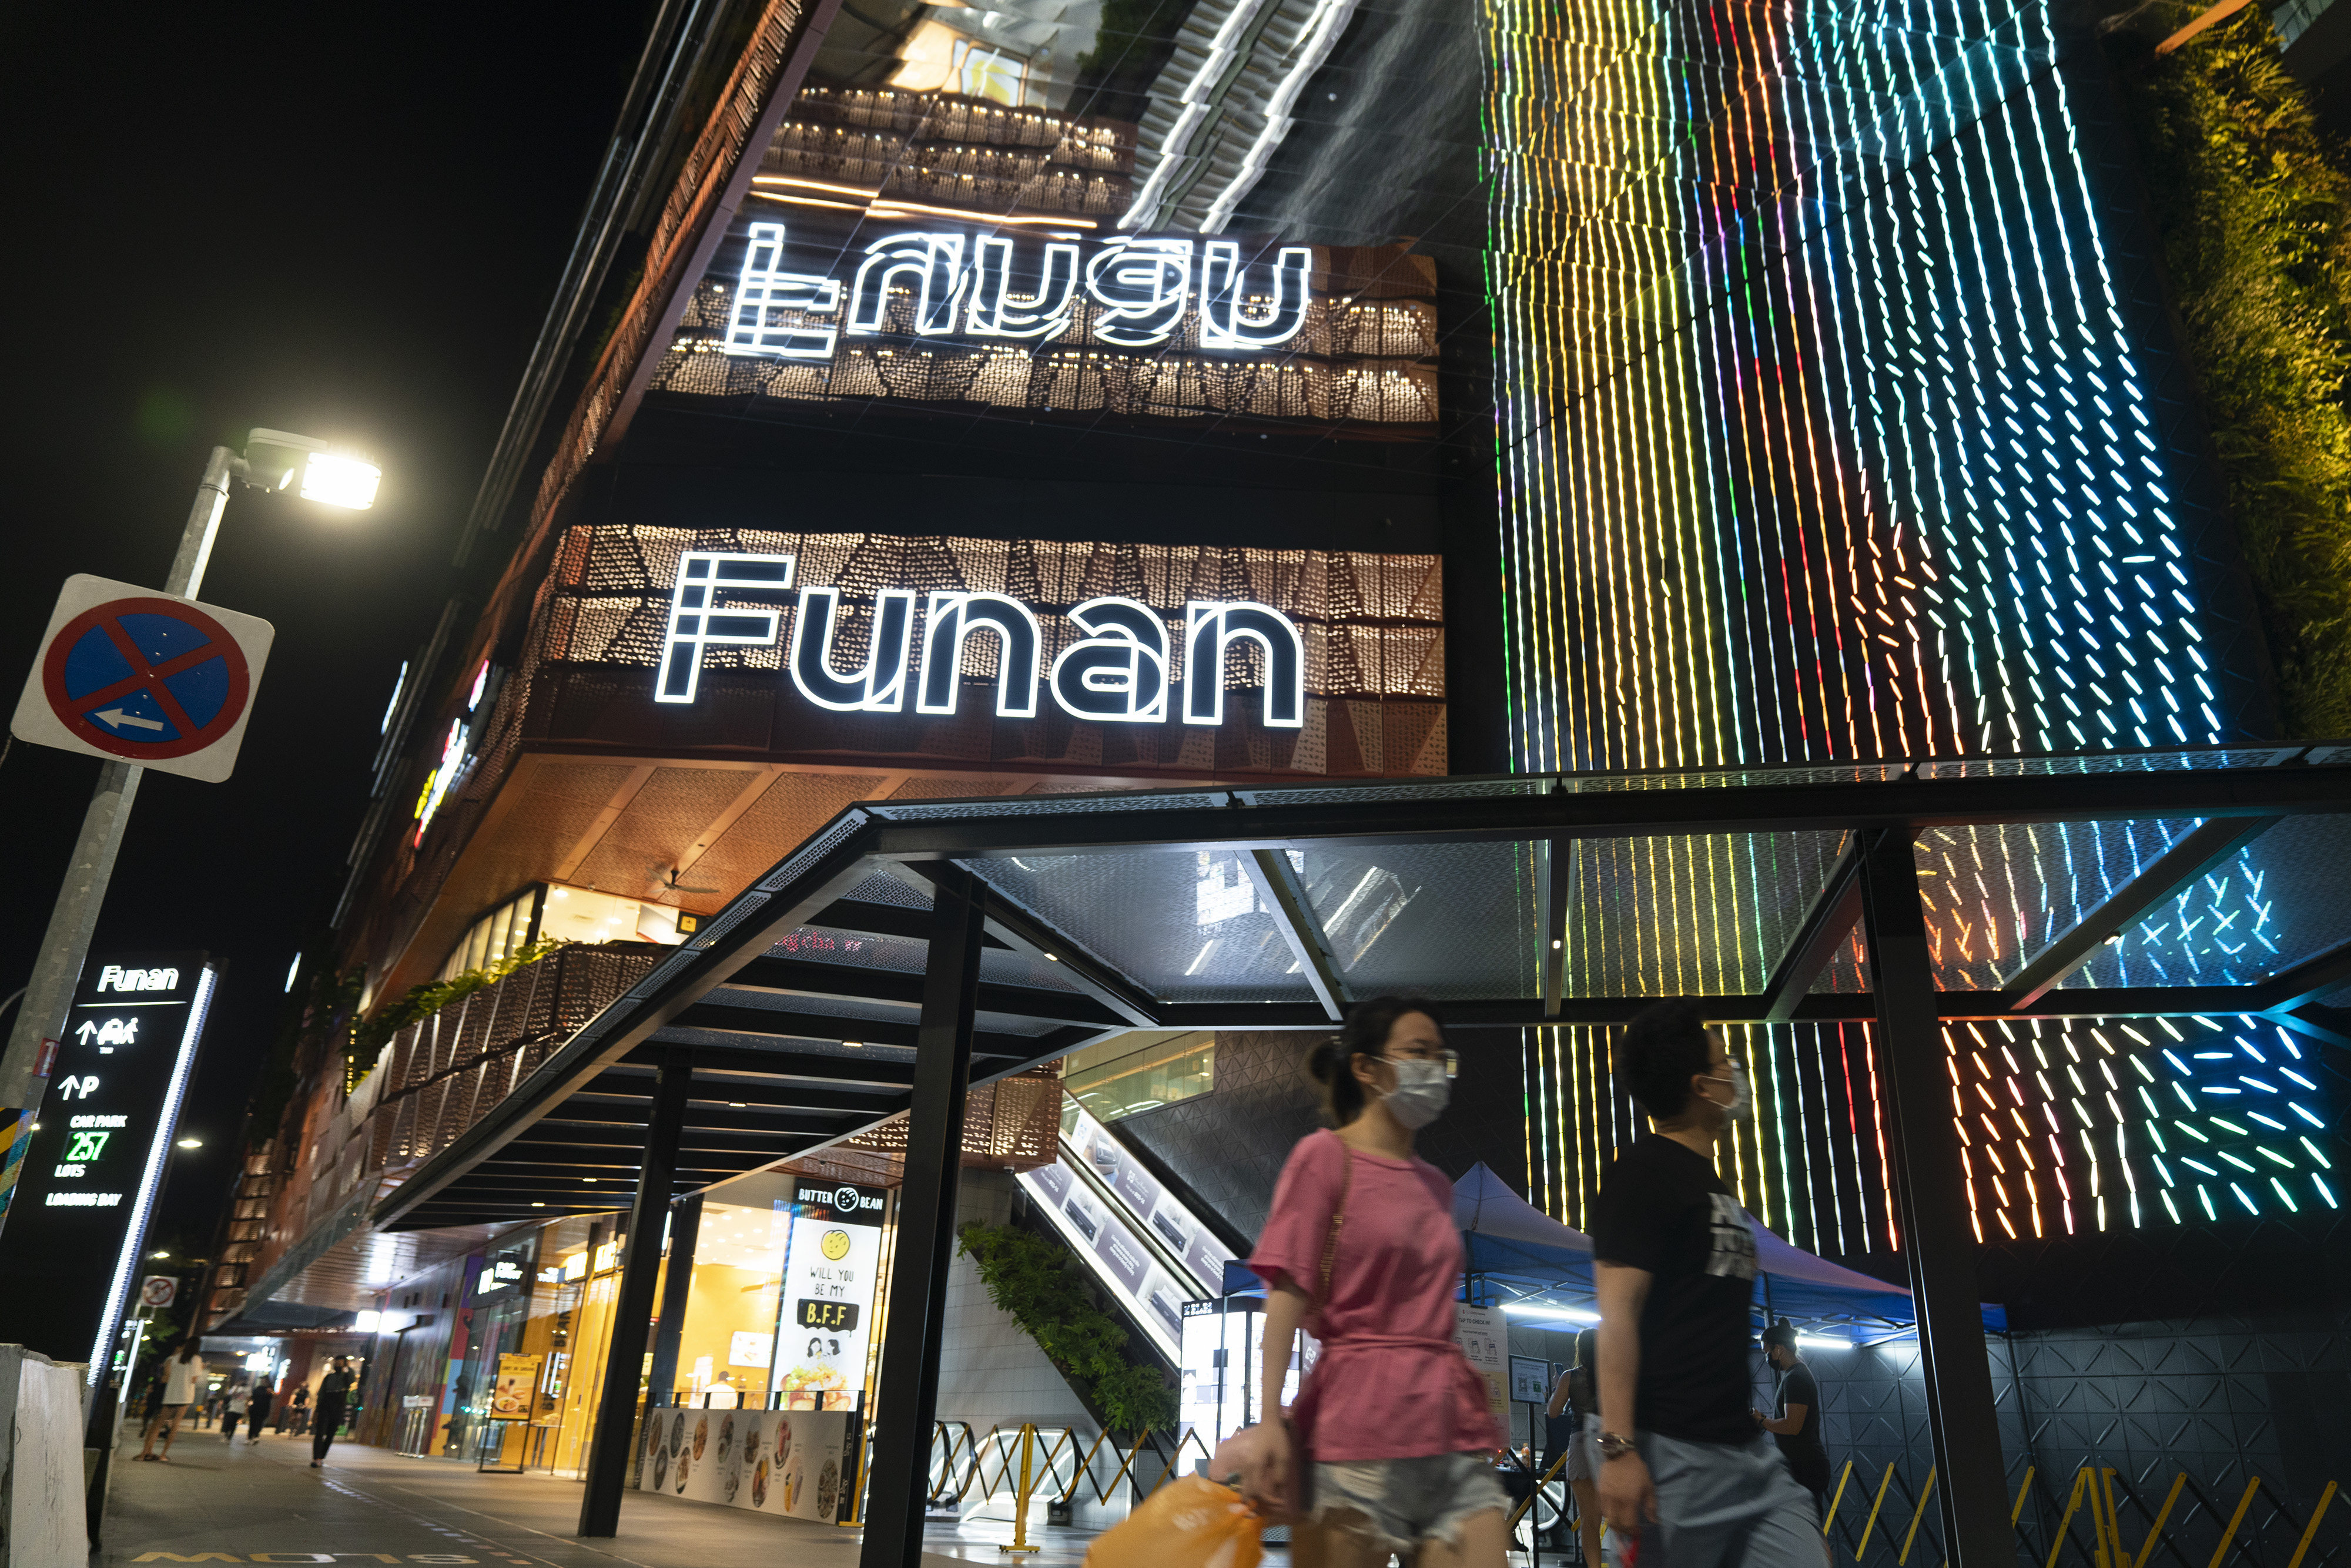 Pedestrians walk past a shopping mall in Singapore on June 6, 2021. Digital lending is expected to reach US$92 billion in transactions in Southeast Asia alone by 2025. Photo: Bloomberg